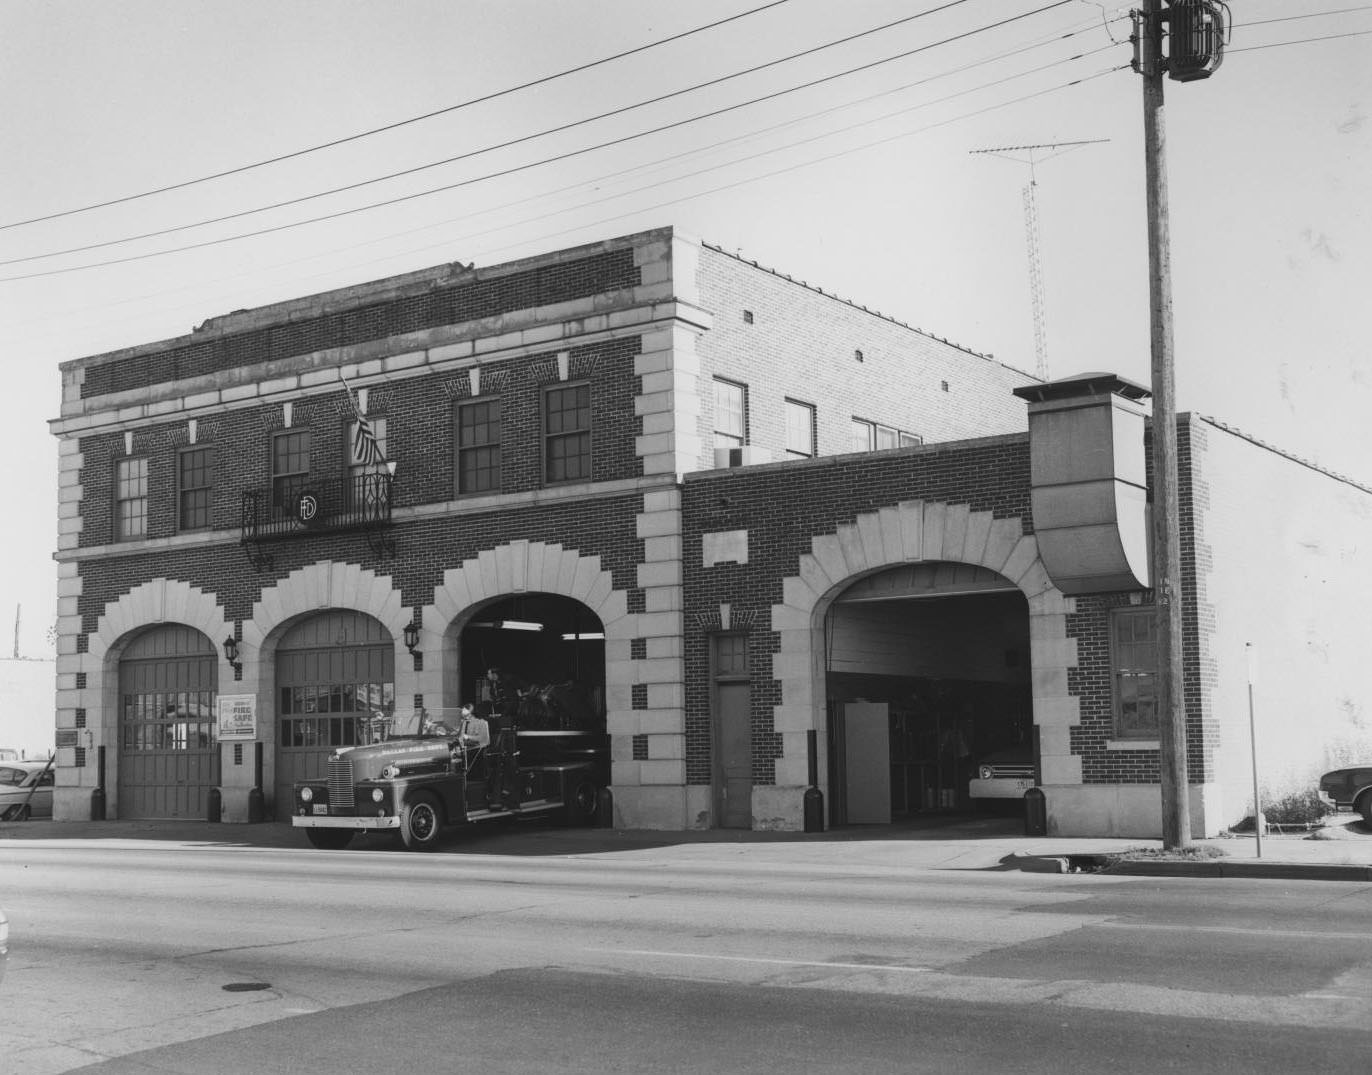 Dallas Fire Station 1 and Fire Truck, 1969